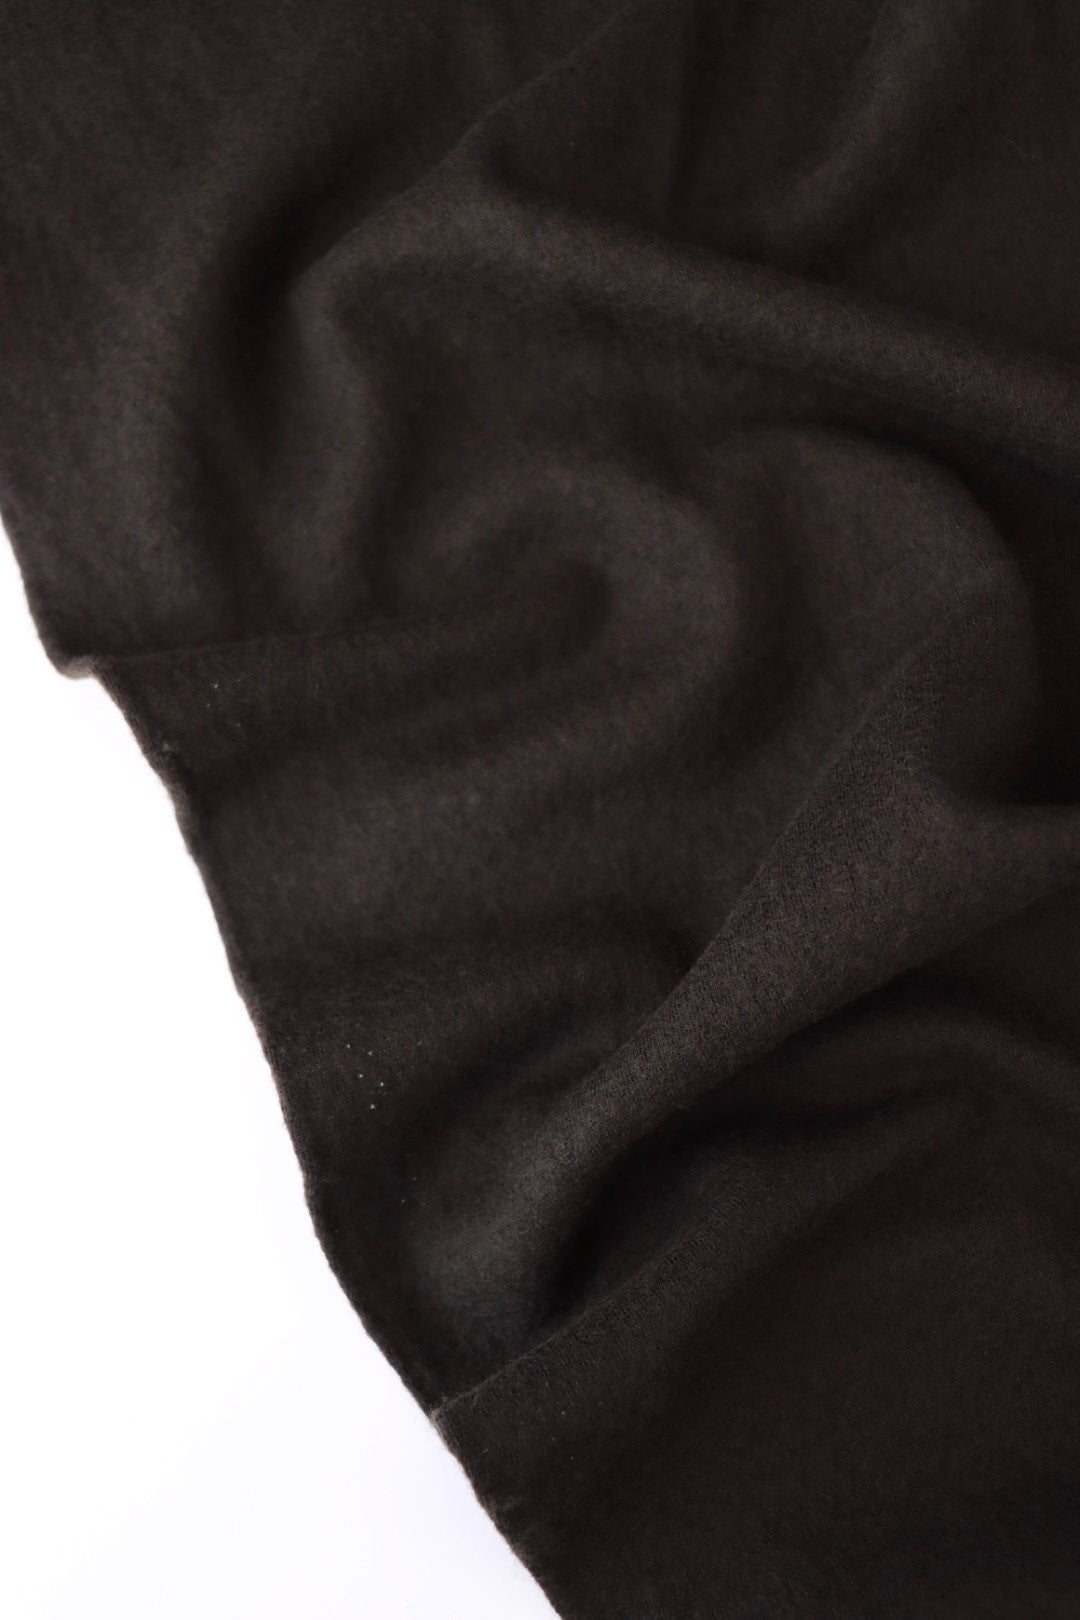 Black Shimmer Scuba Fabric - Exclusive to Bra-Makers Supply